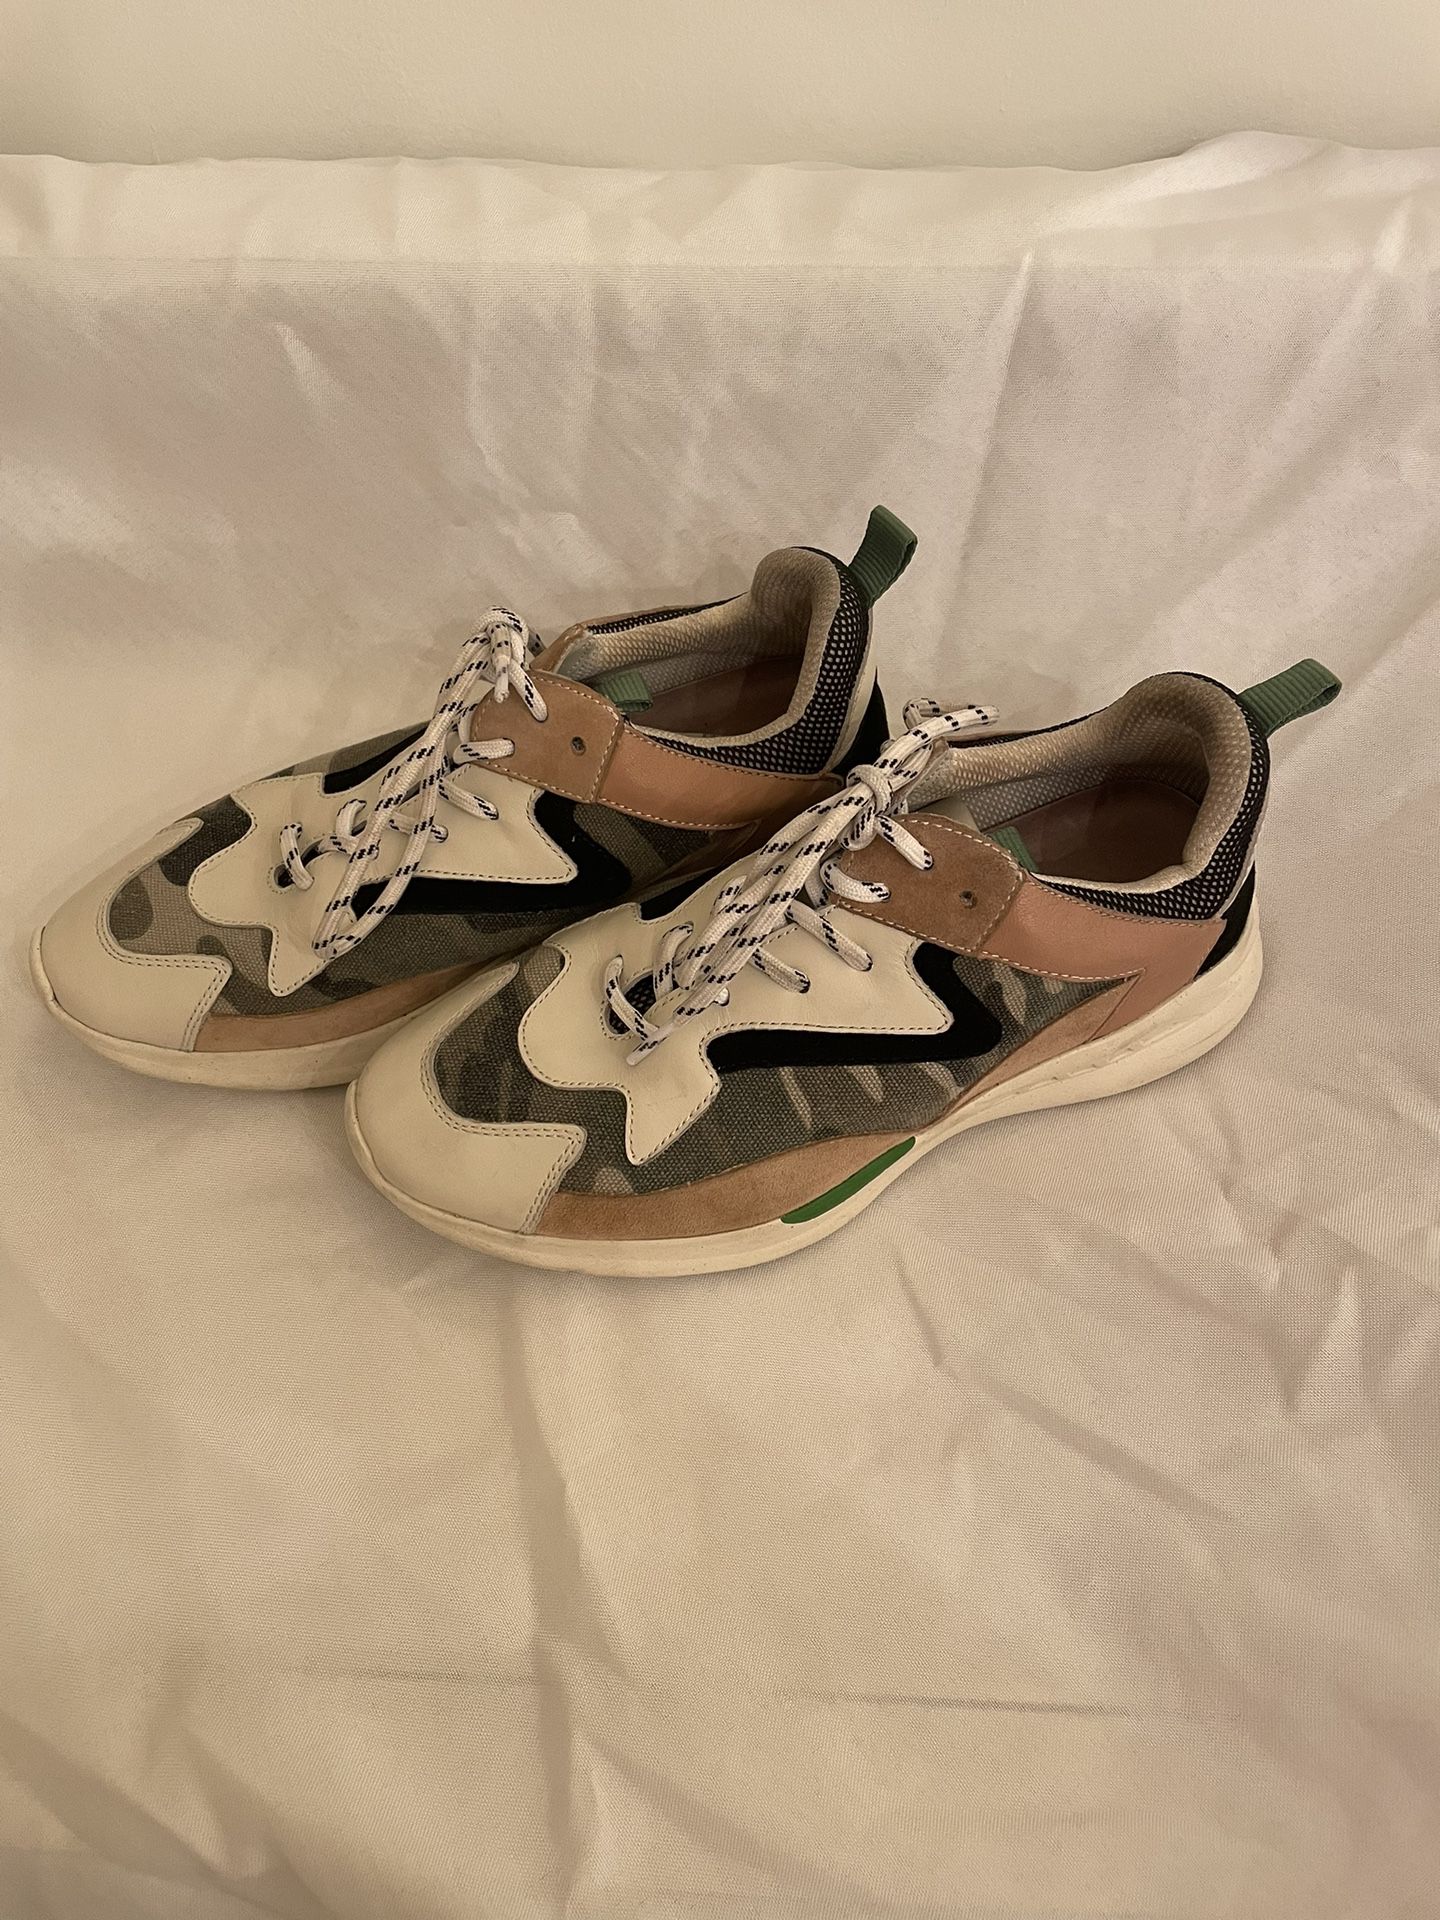 Women’s Shoes Sanctuary GROOVE Sneakers Camouflage 8M Leather upper